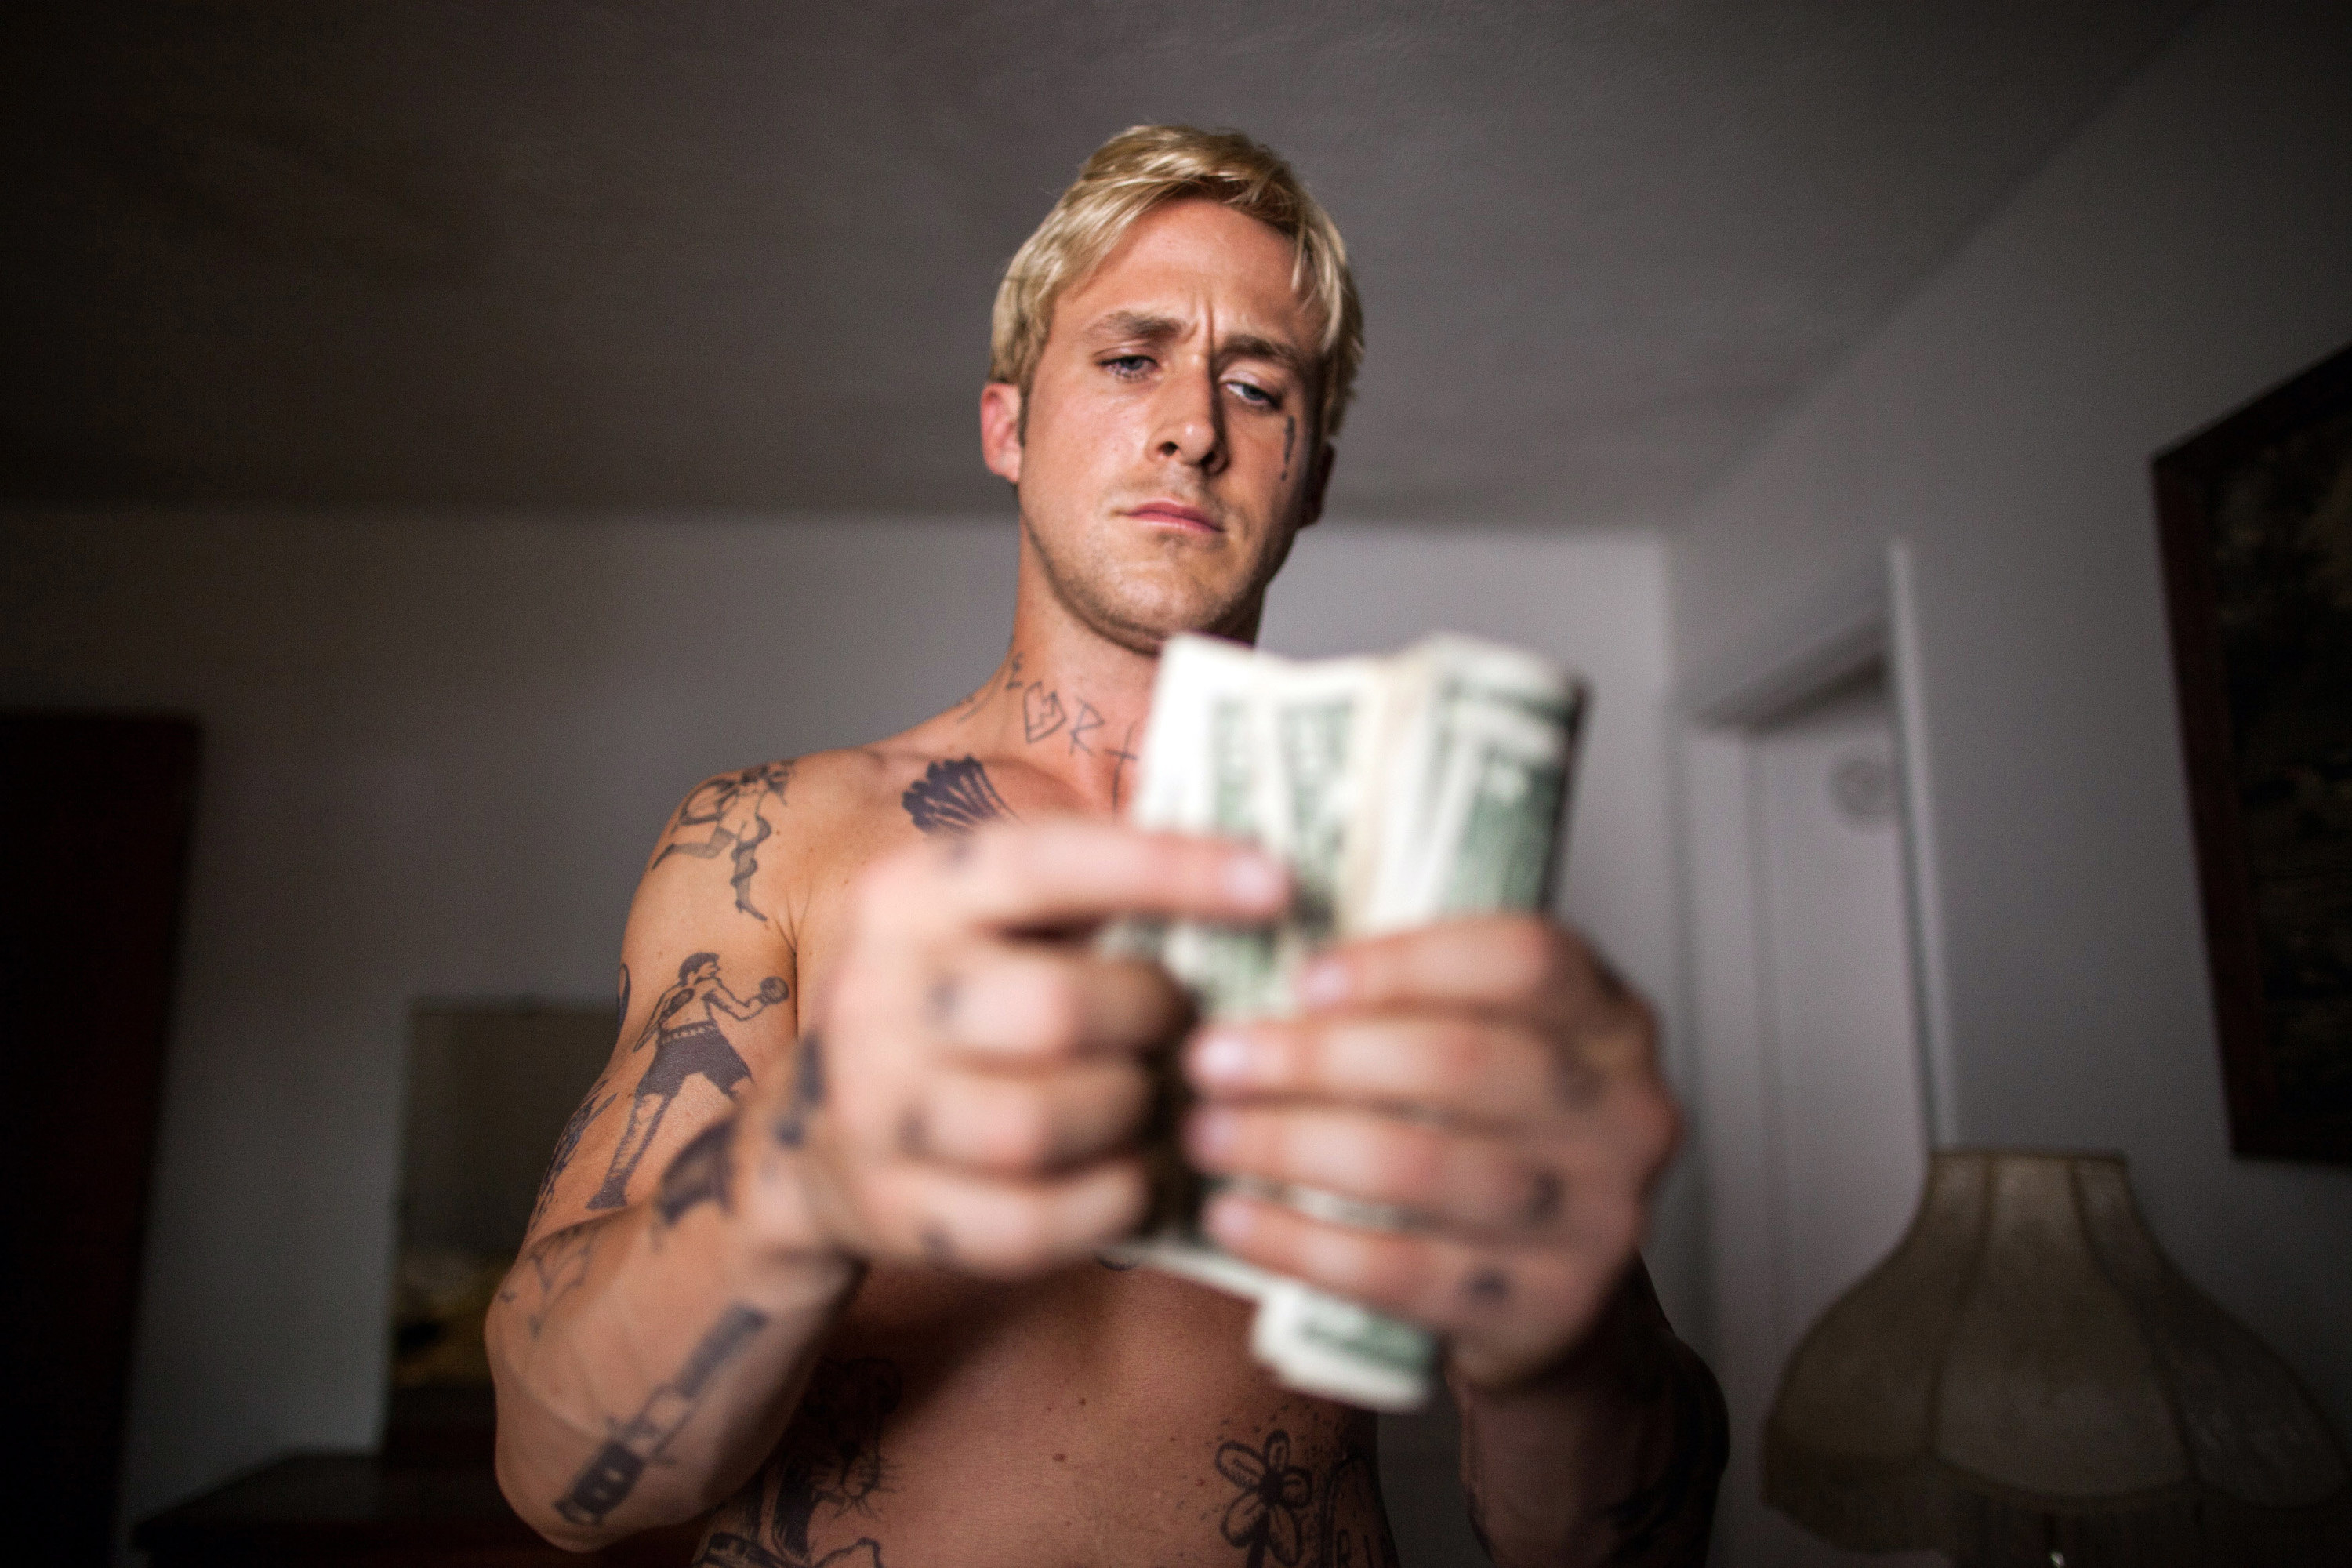 A shirtless tattooed man counts cash